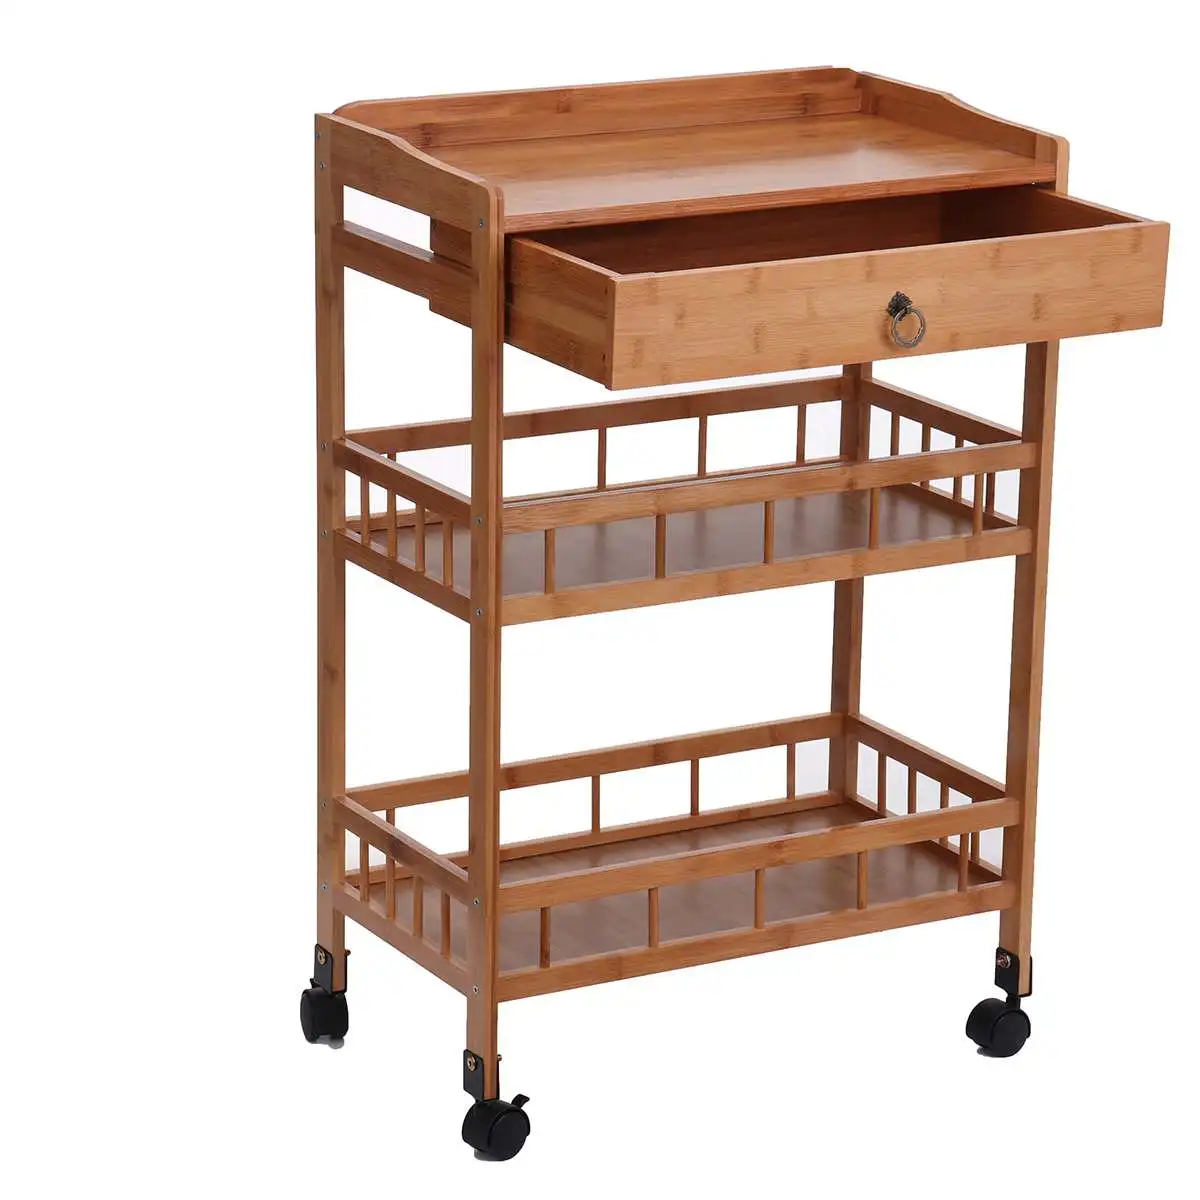 

Kitchen Trolley 3 Layers Bar Serving Cart Rolling Wheels Bamboo Dining Room Cart Removable Floor Shelf Storage Rack Organizer